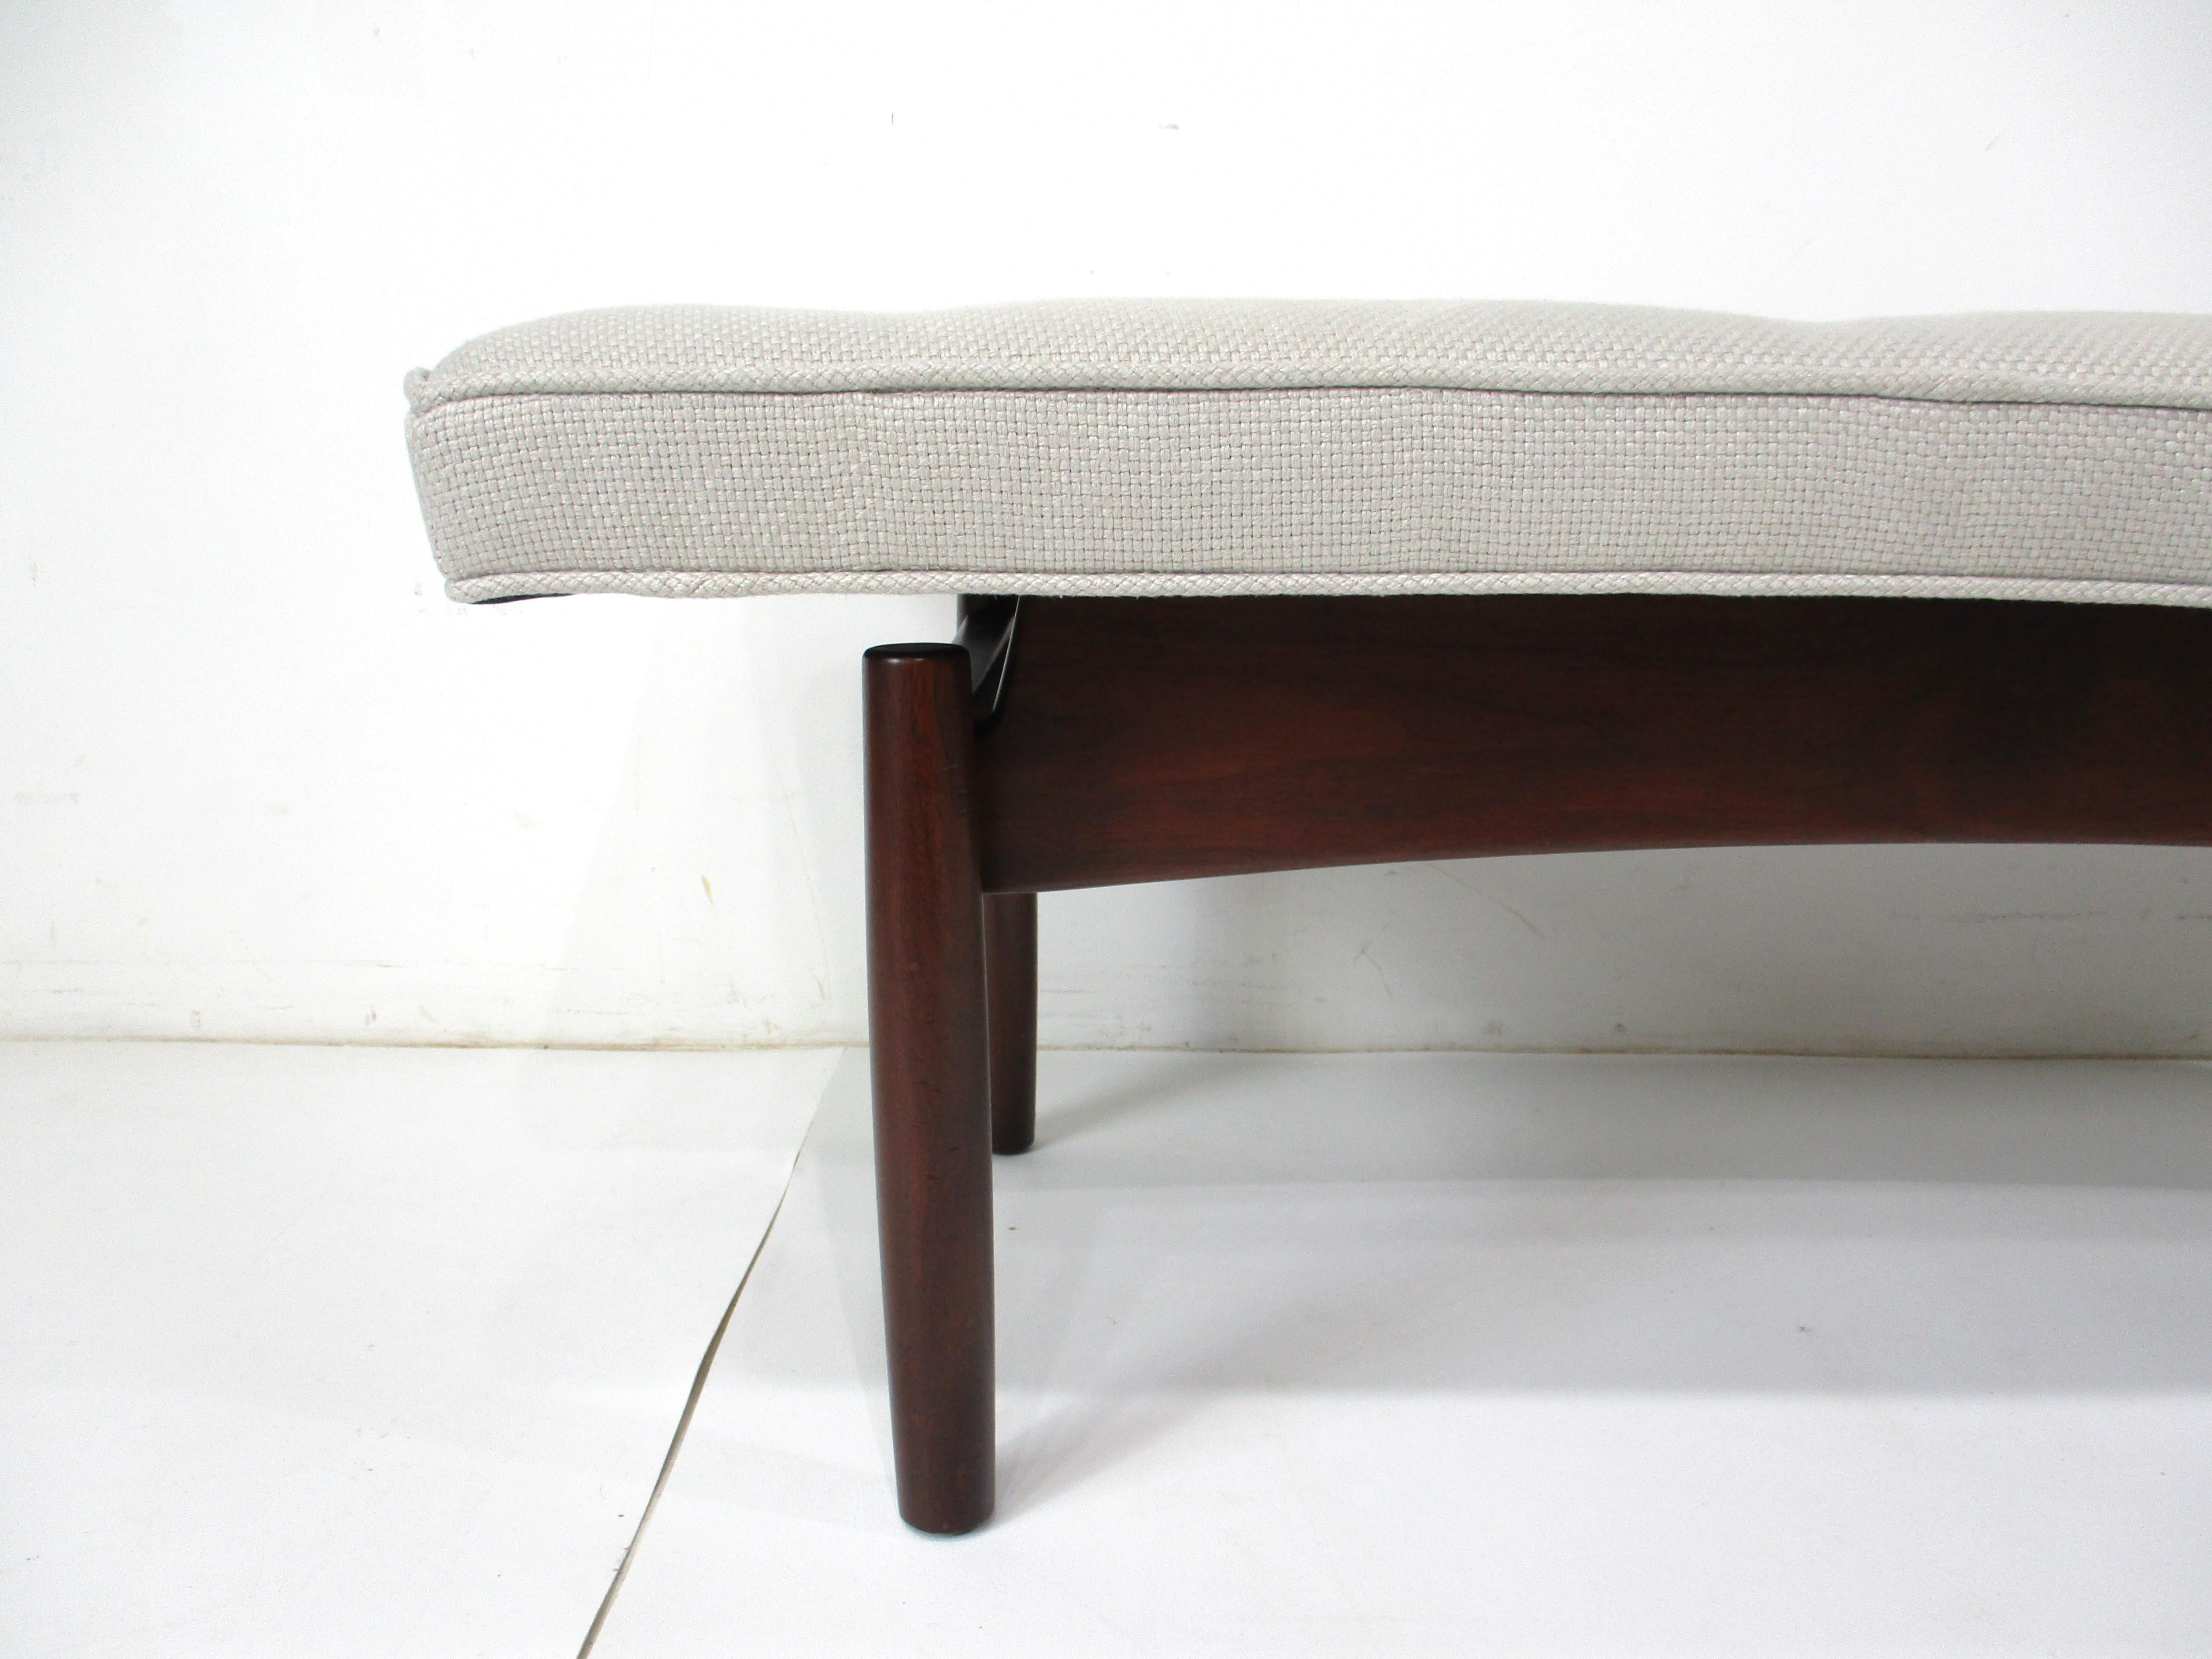 Upholstered Walnut Bench in the Style of Greta Grossman Danish Modern (A) In Good Condition For Sale In Cincinnati, OH